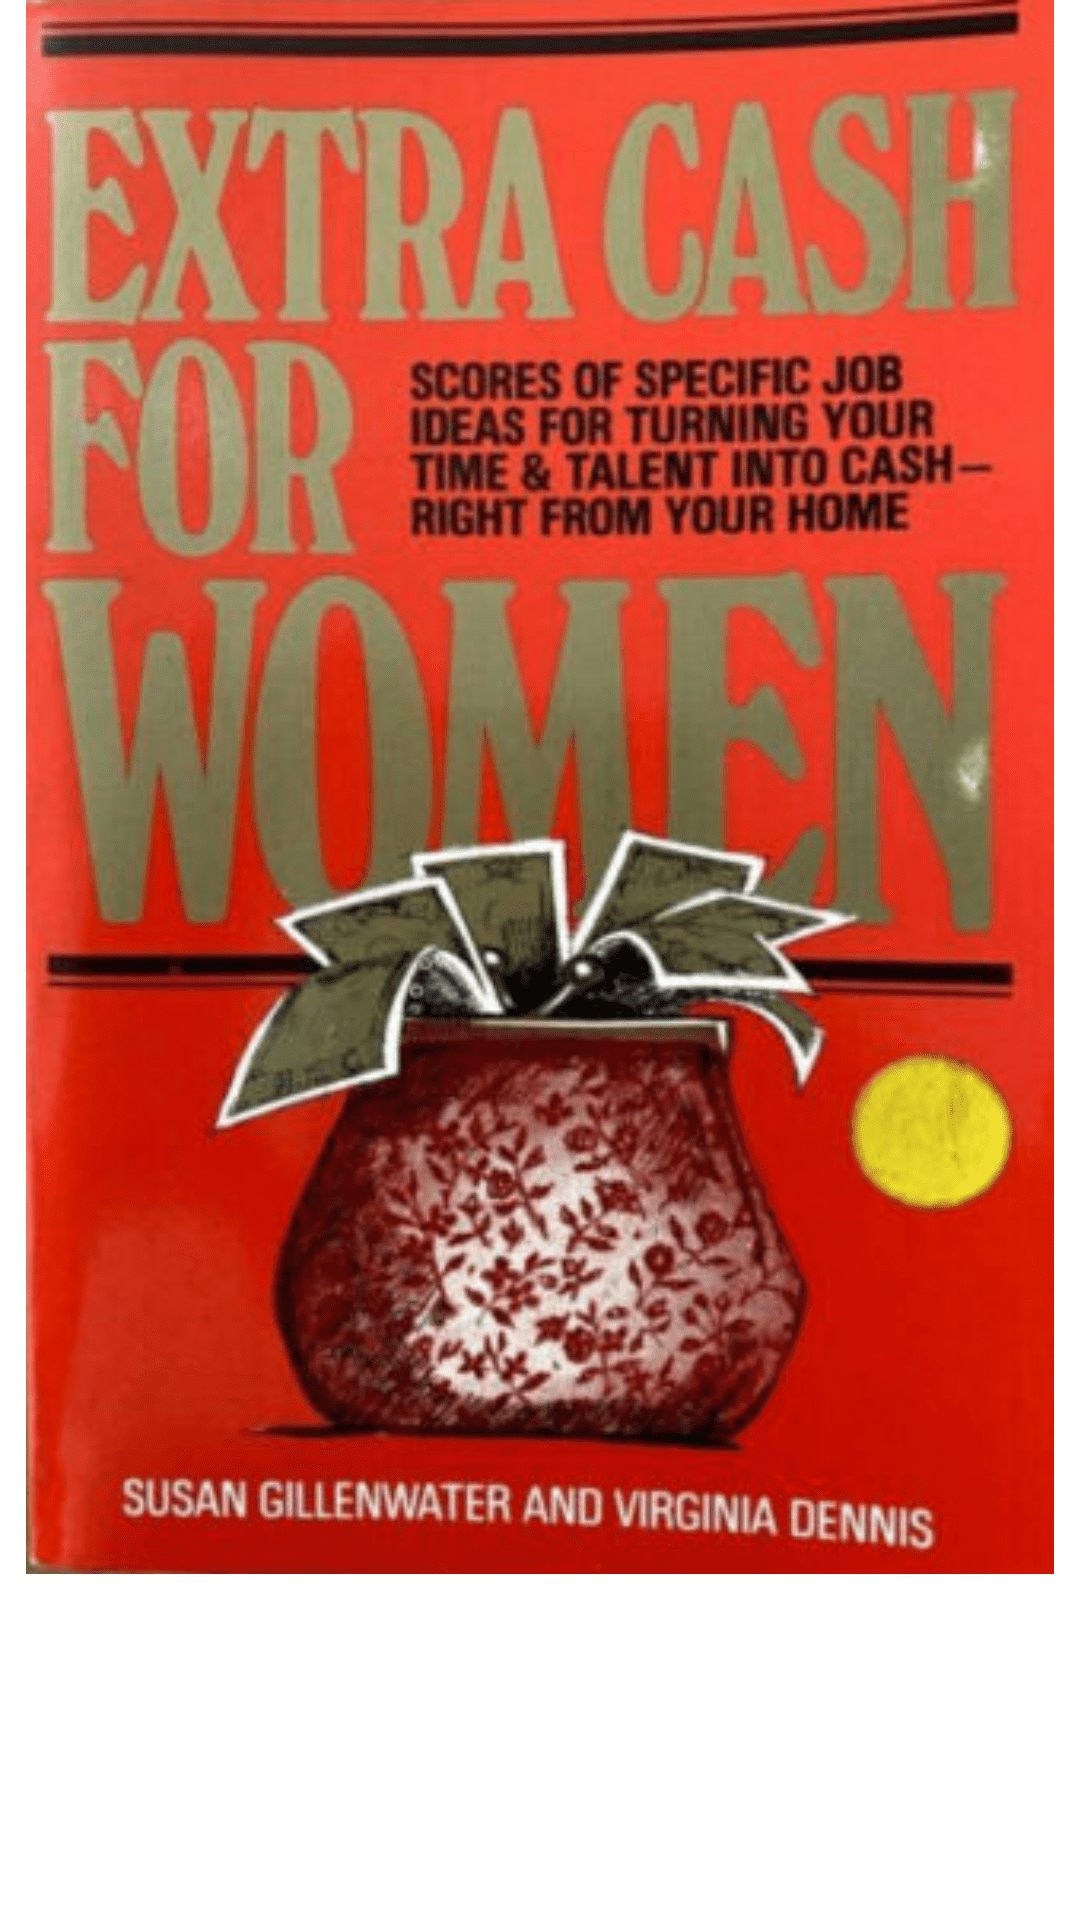 Extra Cash for Women by Susan Gillenwater